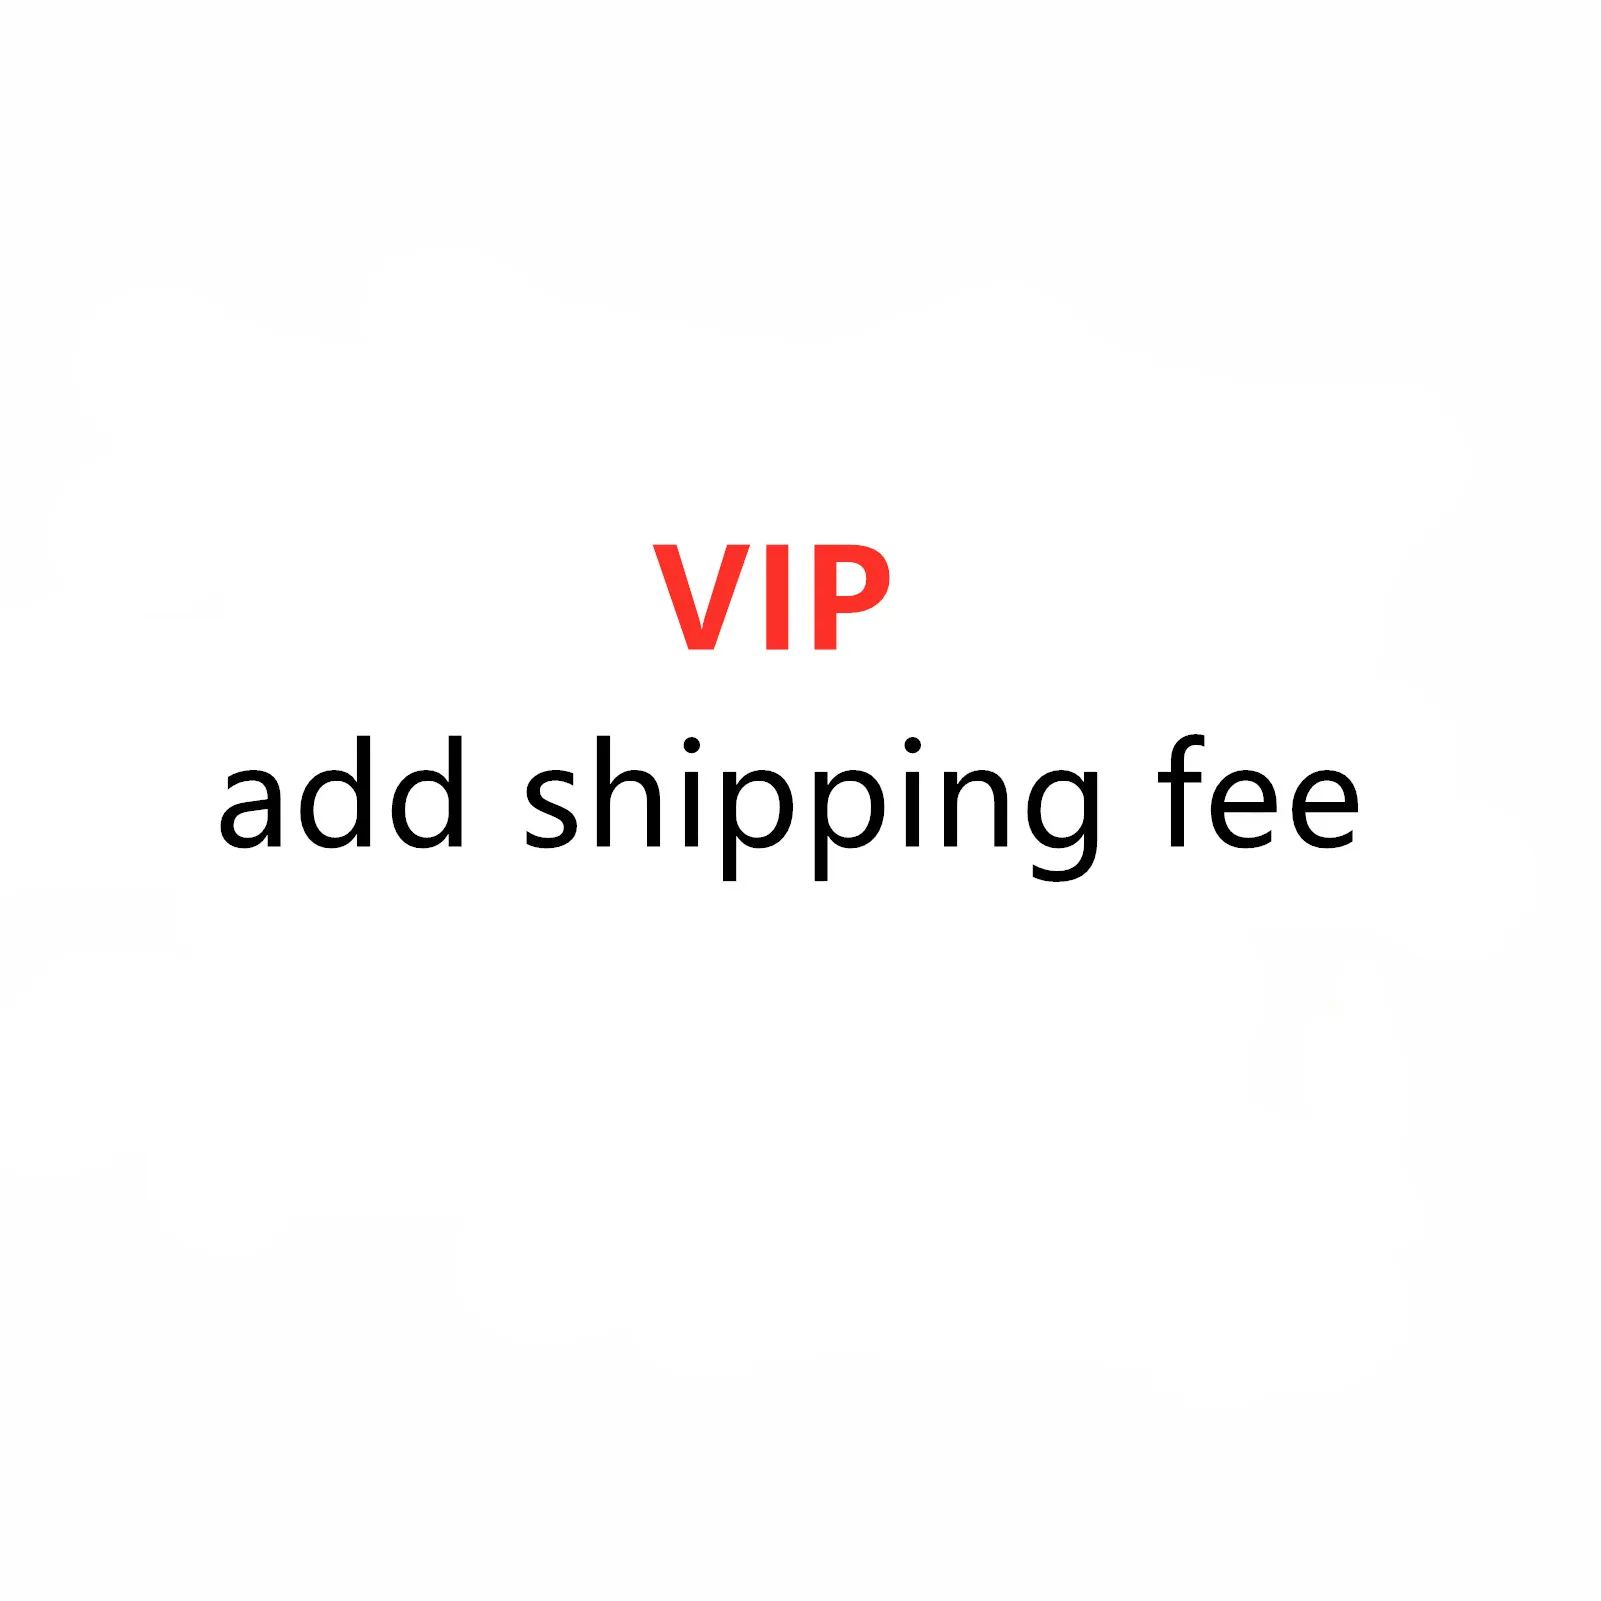 VIP add shipping fee only add shipping cost make up the postage fee no product